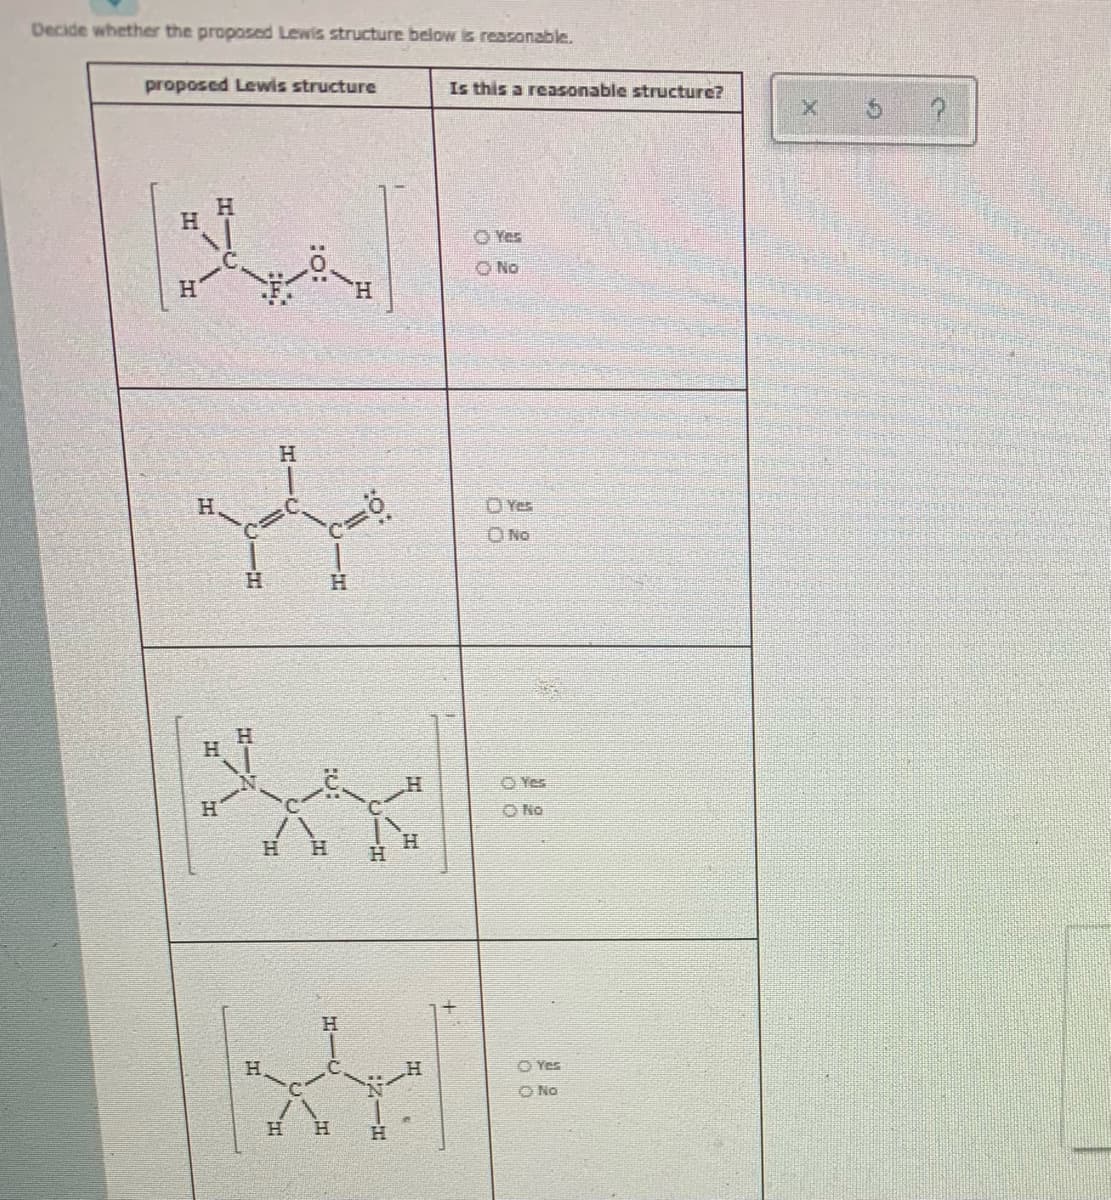 Decide whether the proposed Lewis structure below is reasonable.
proposed Lewis structure
Is this a reasonable structure?
O Yes
O No
H.
H.
H.
OYes
O No
H.
H.
Yes
H.
O No
H.
H.
H.
H.
H.
O No
H.
H.
HIC
